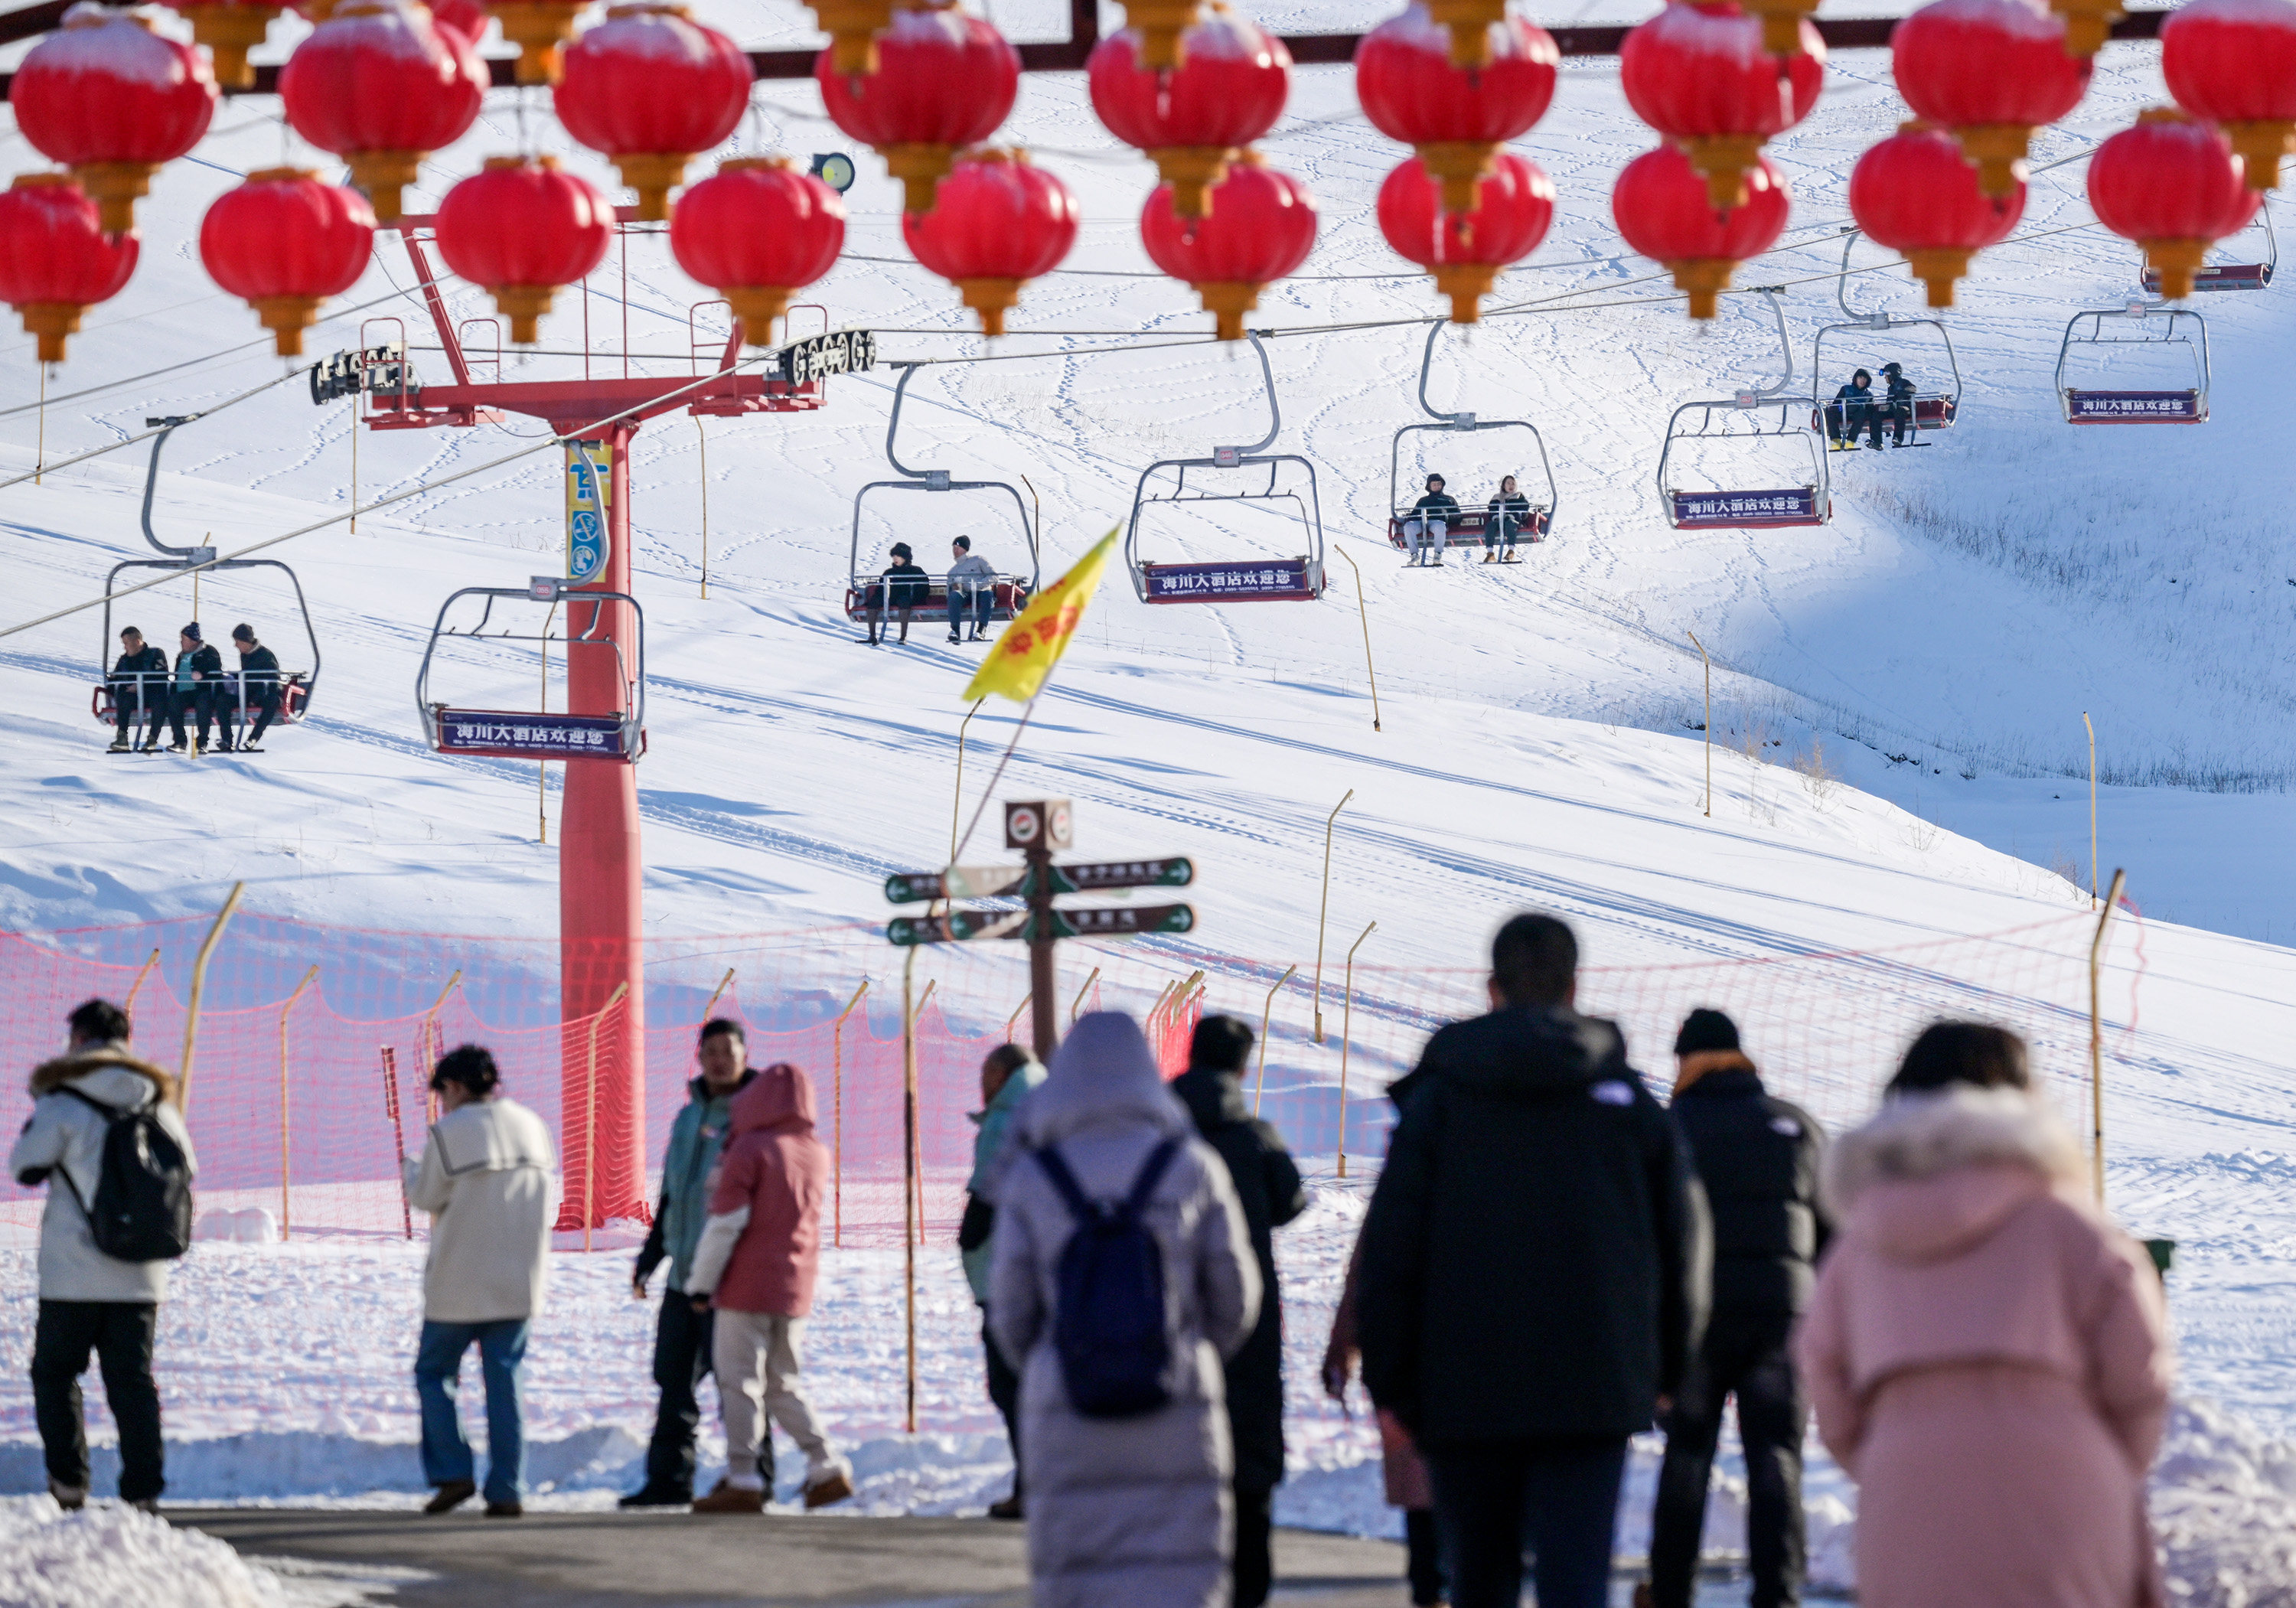 Ski resorts are among the most popular destinations for Chinese travellers over the New Year break. Photo: Xinhua